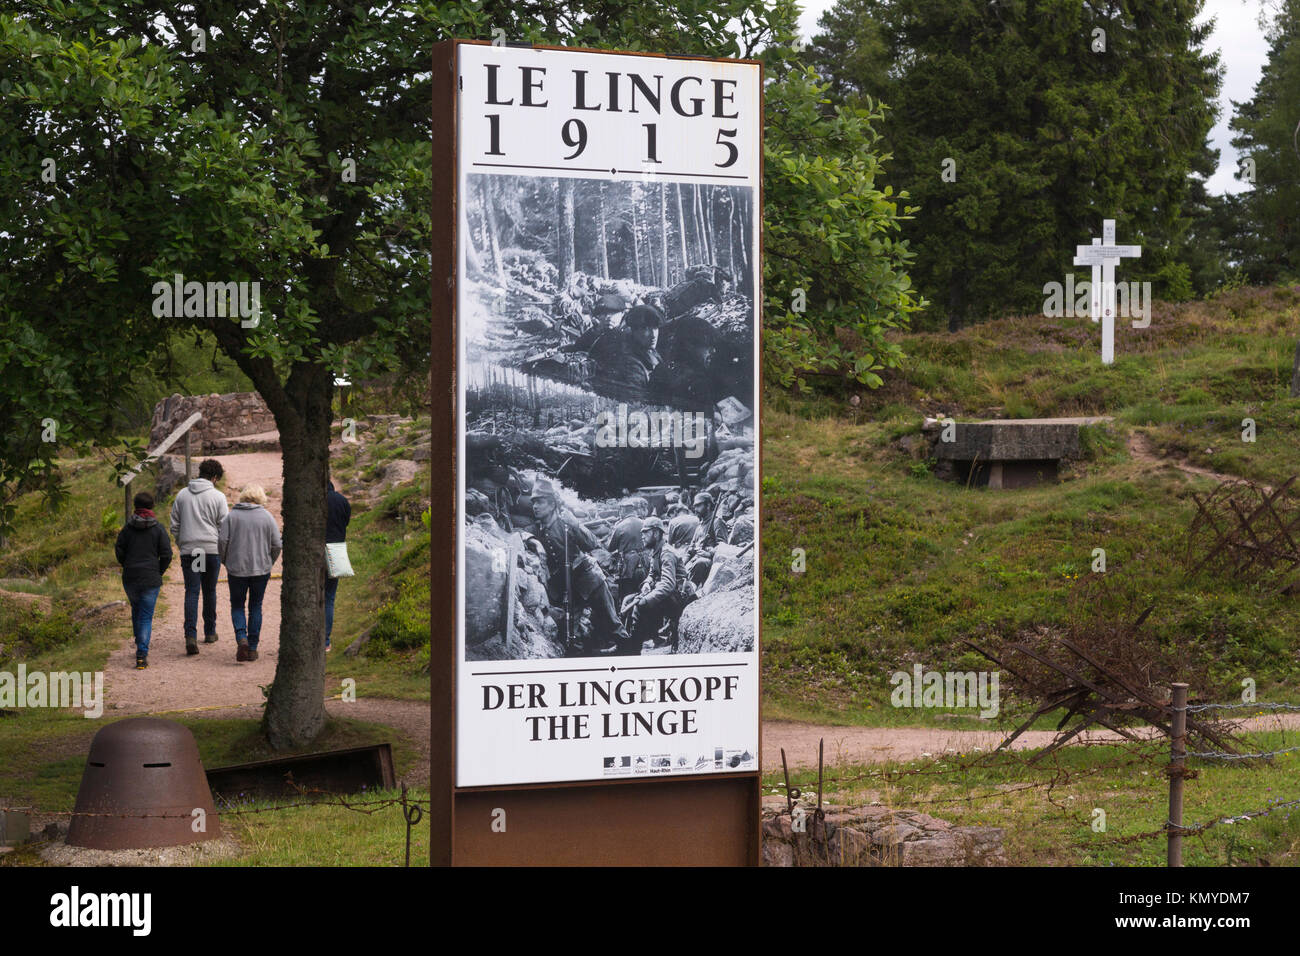 A family making their way through memorial museum of the Linge in Alsace, a site of heavy fighting between the French and Germans during WW1 Stock Photo